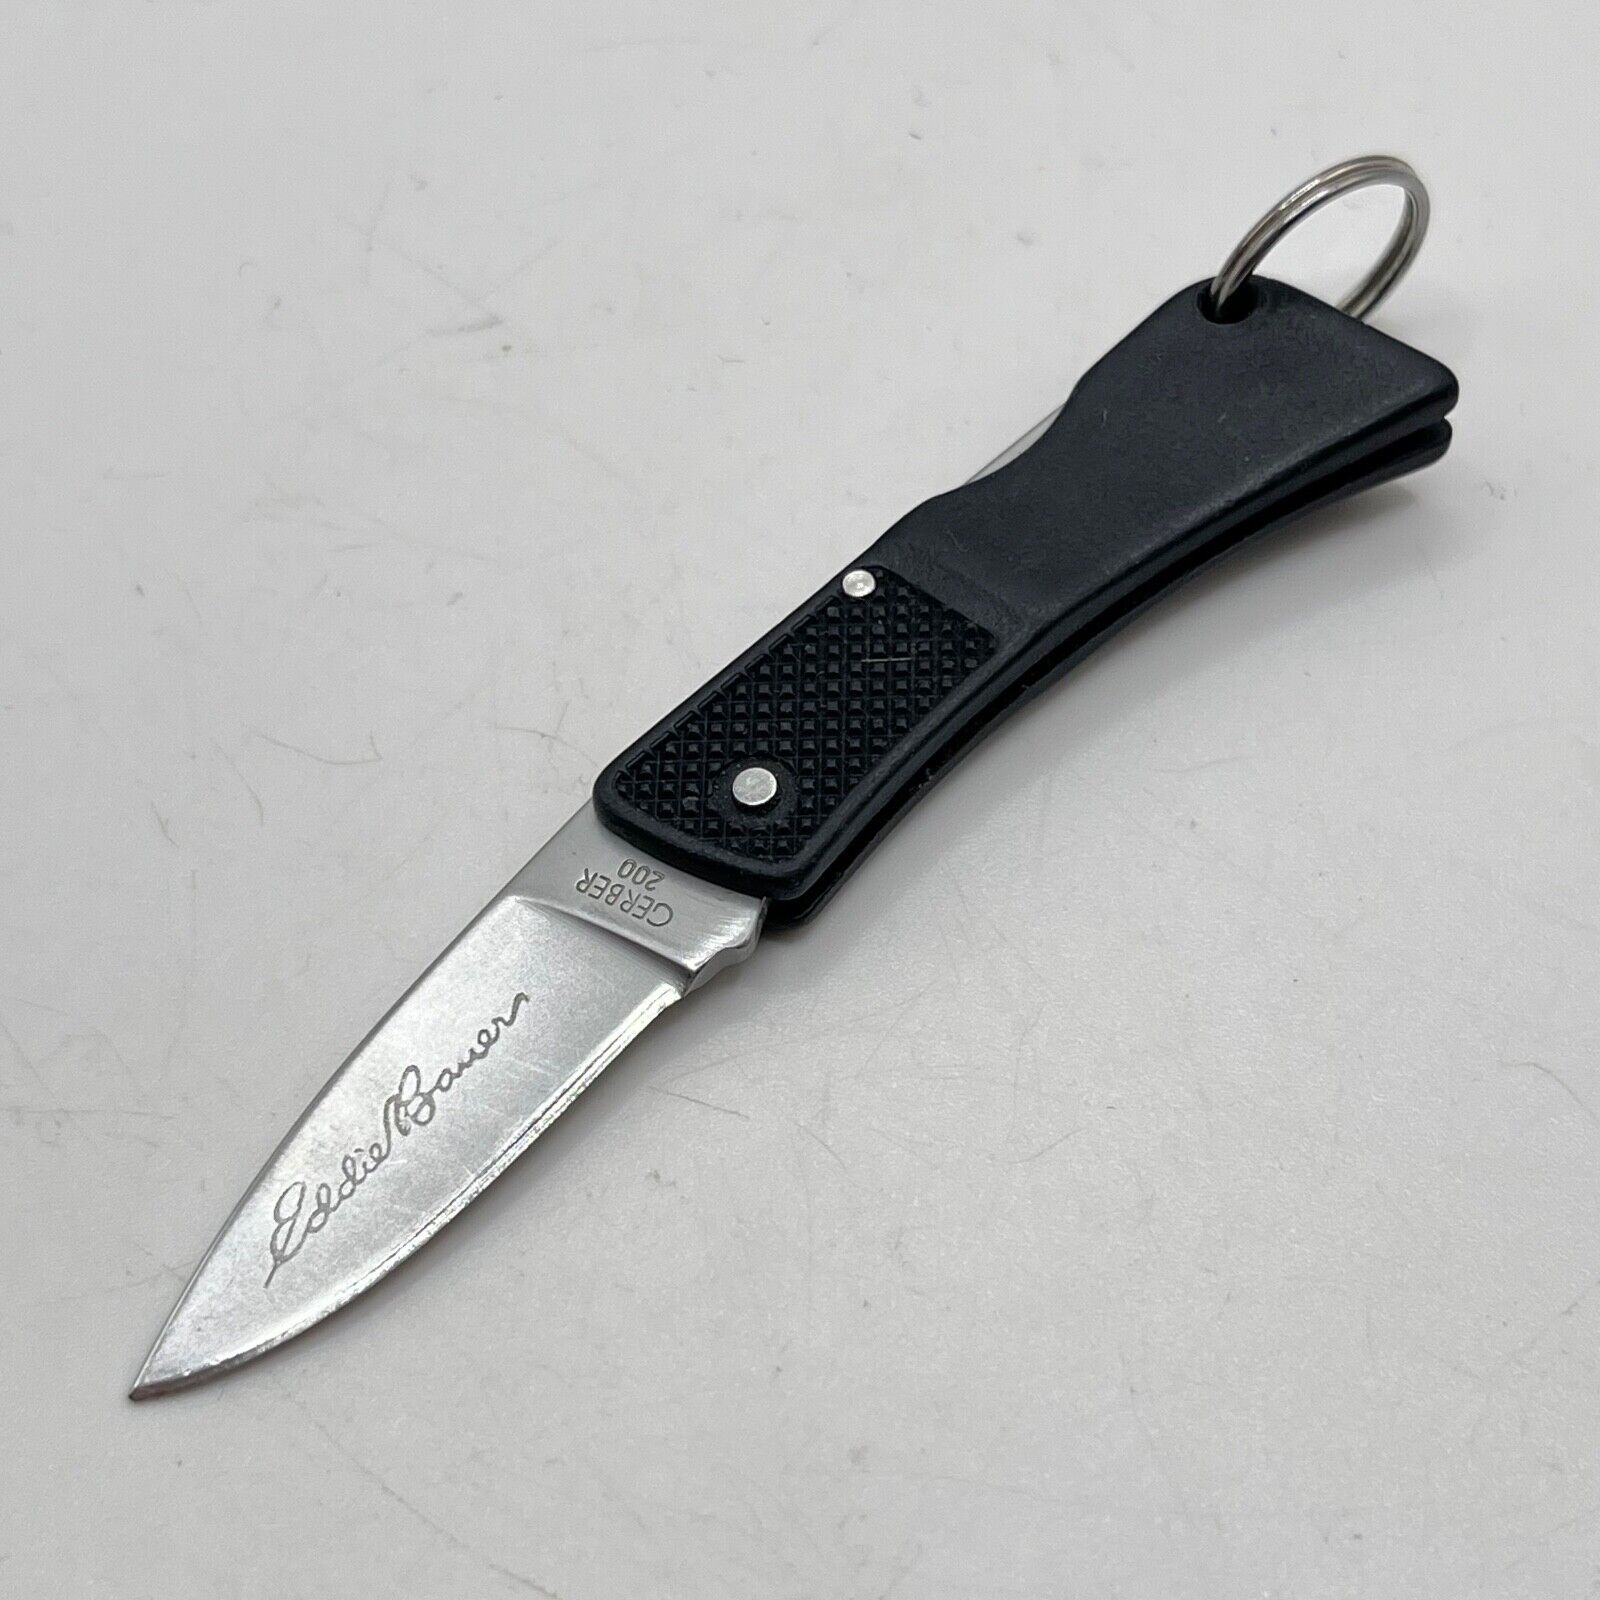 Gerber Micro LST 200 Eddie Bauer Vintage Rare Knife USA - Great condition